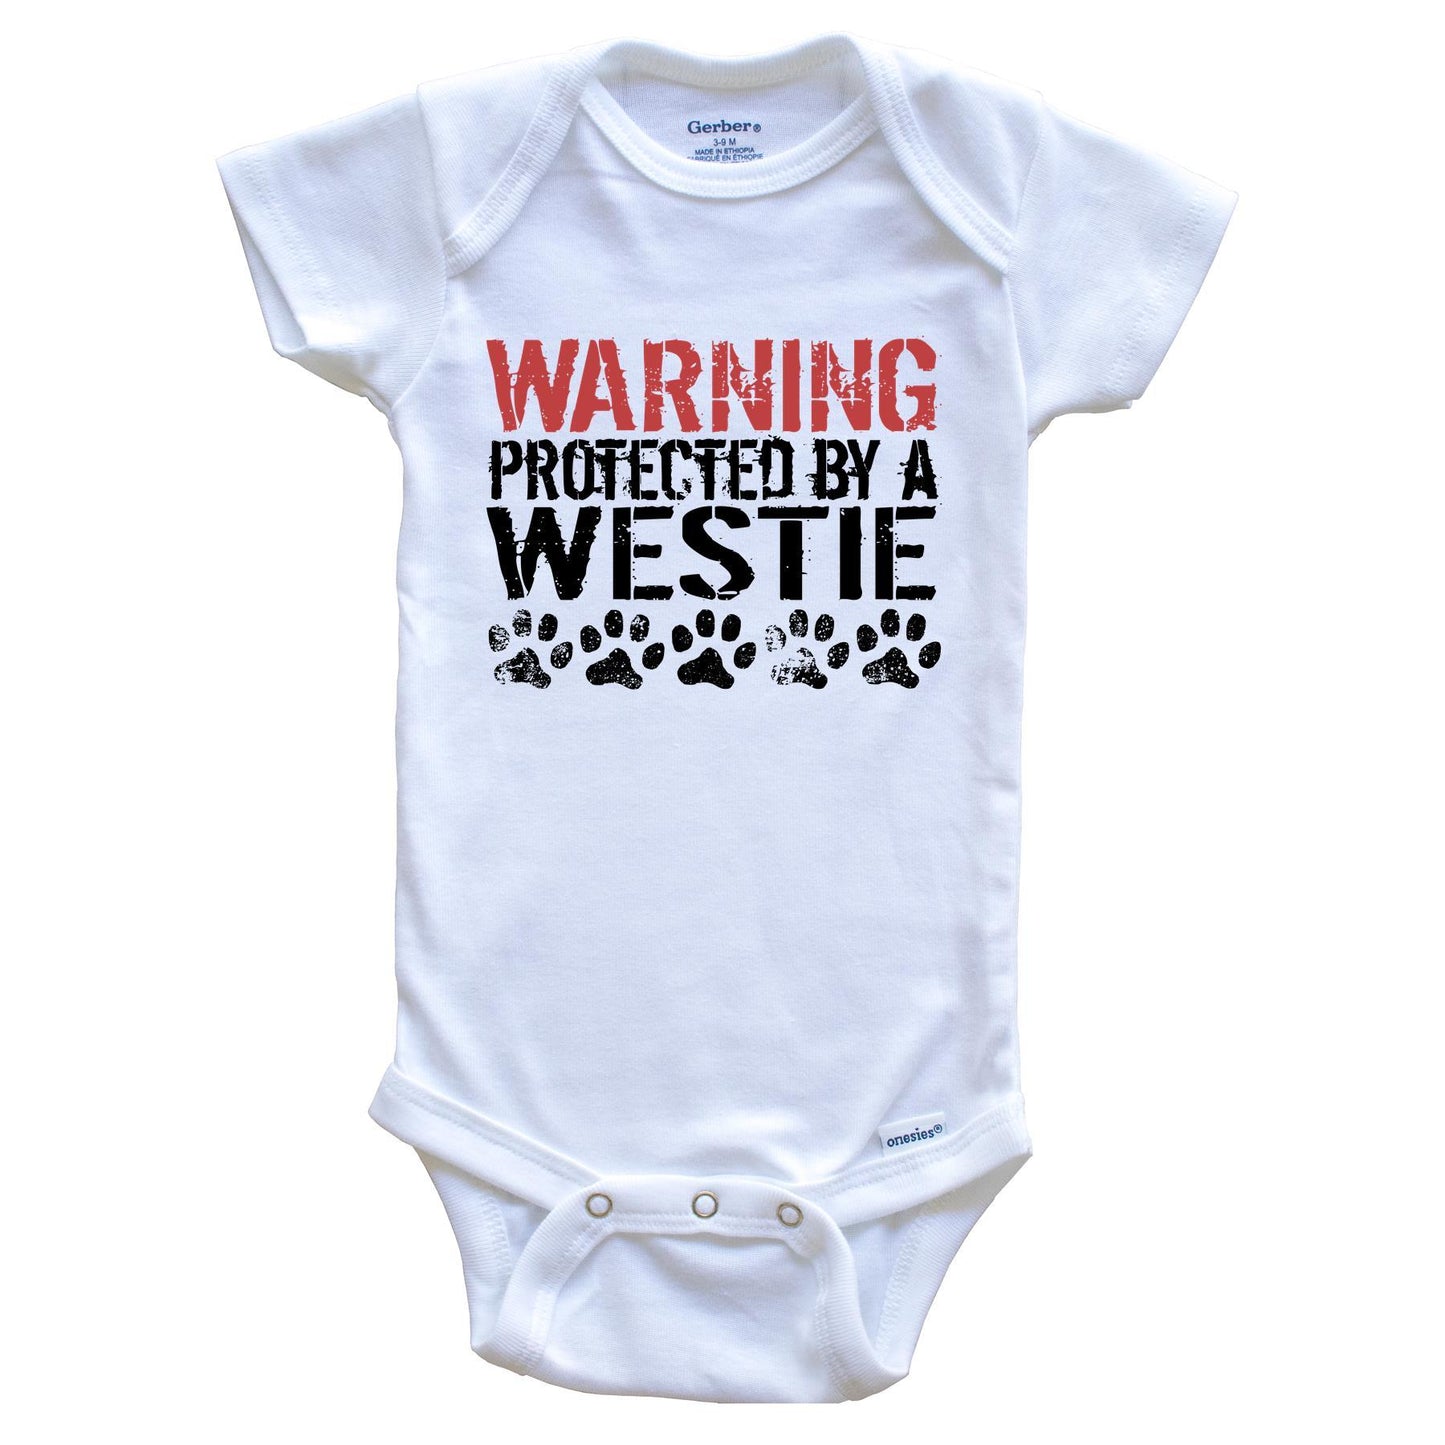 Warning Protected By A Westie Baby Onesie